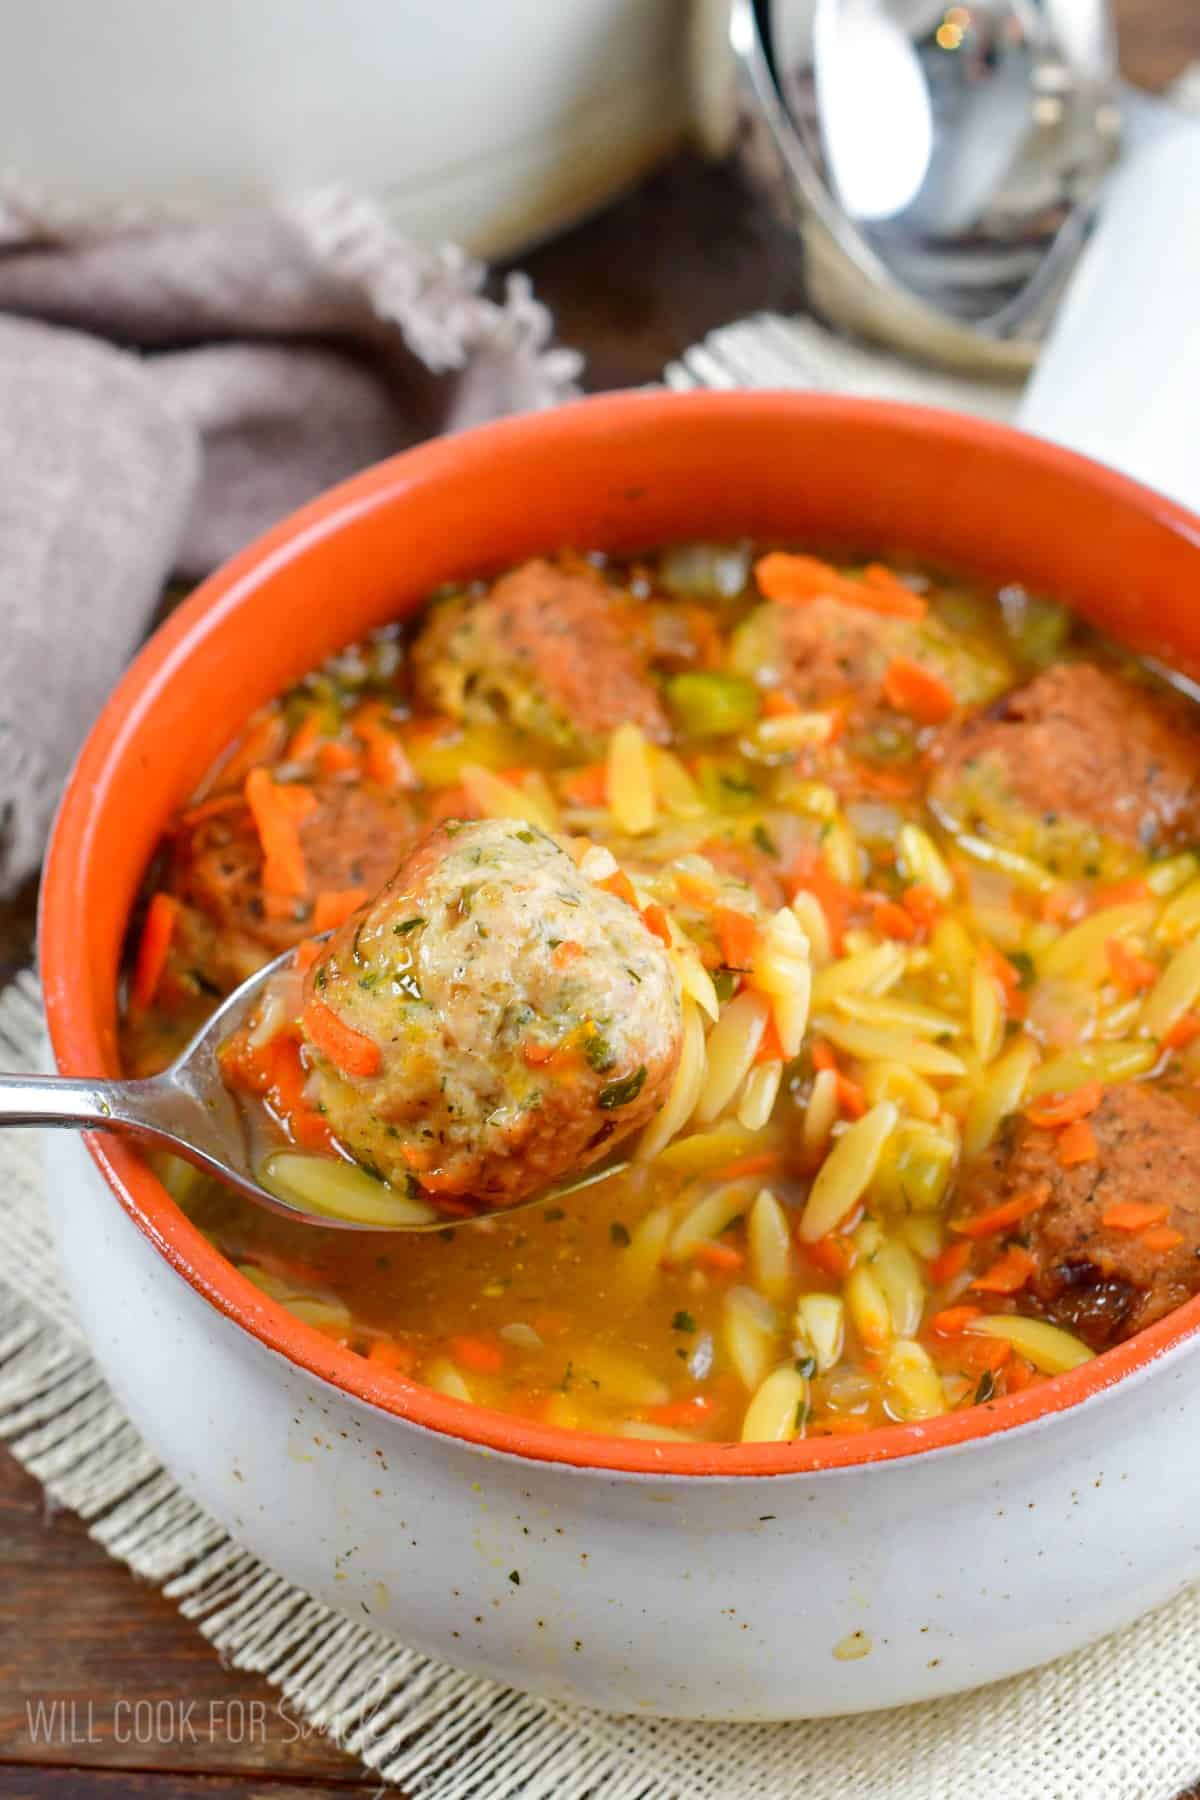 Spooning out a meatball from a bowl of chicken meatball orzo soup.